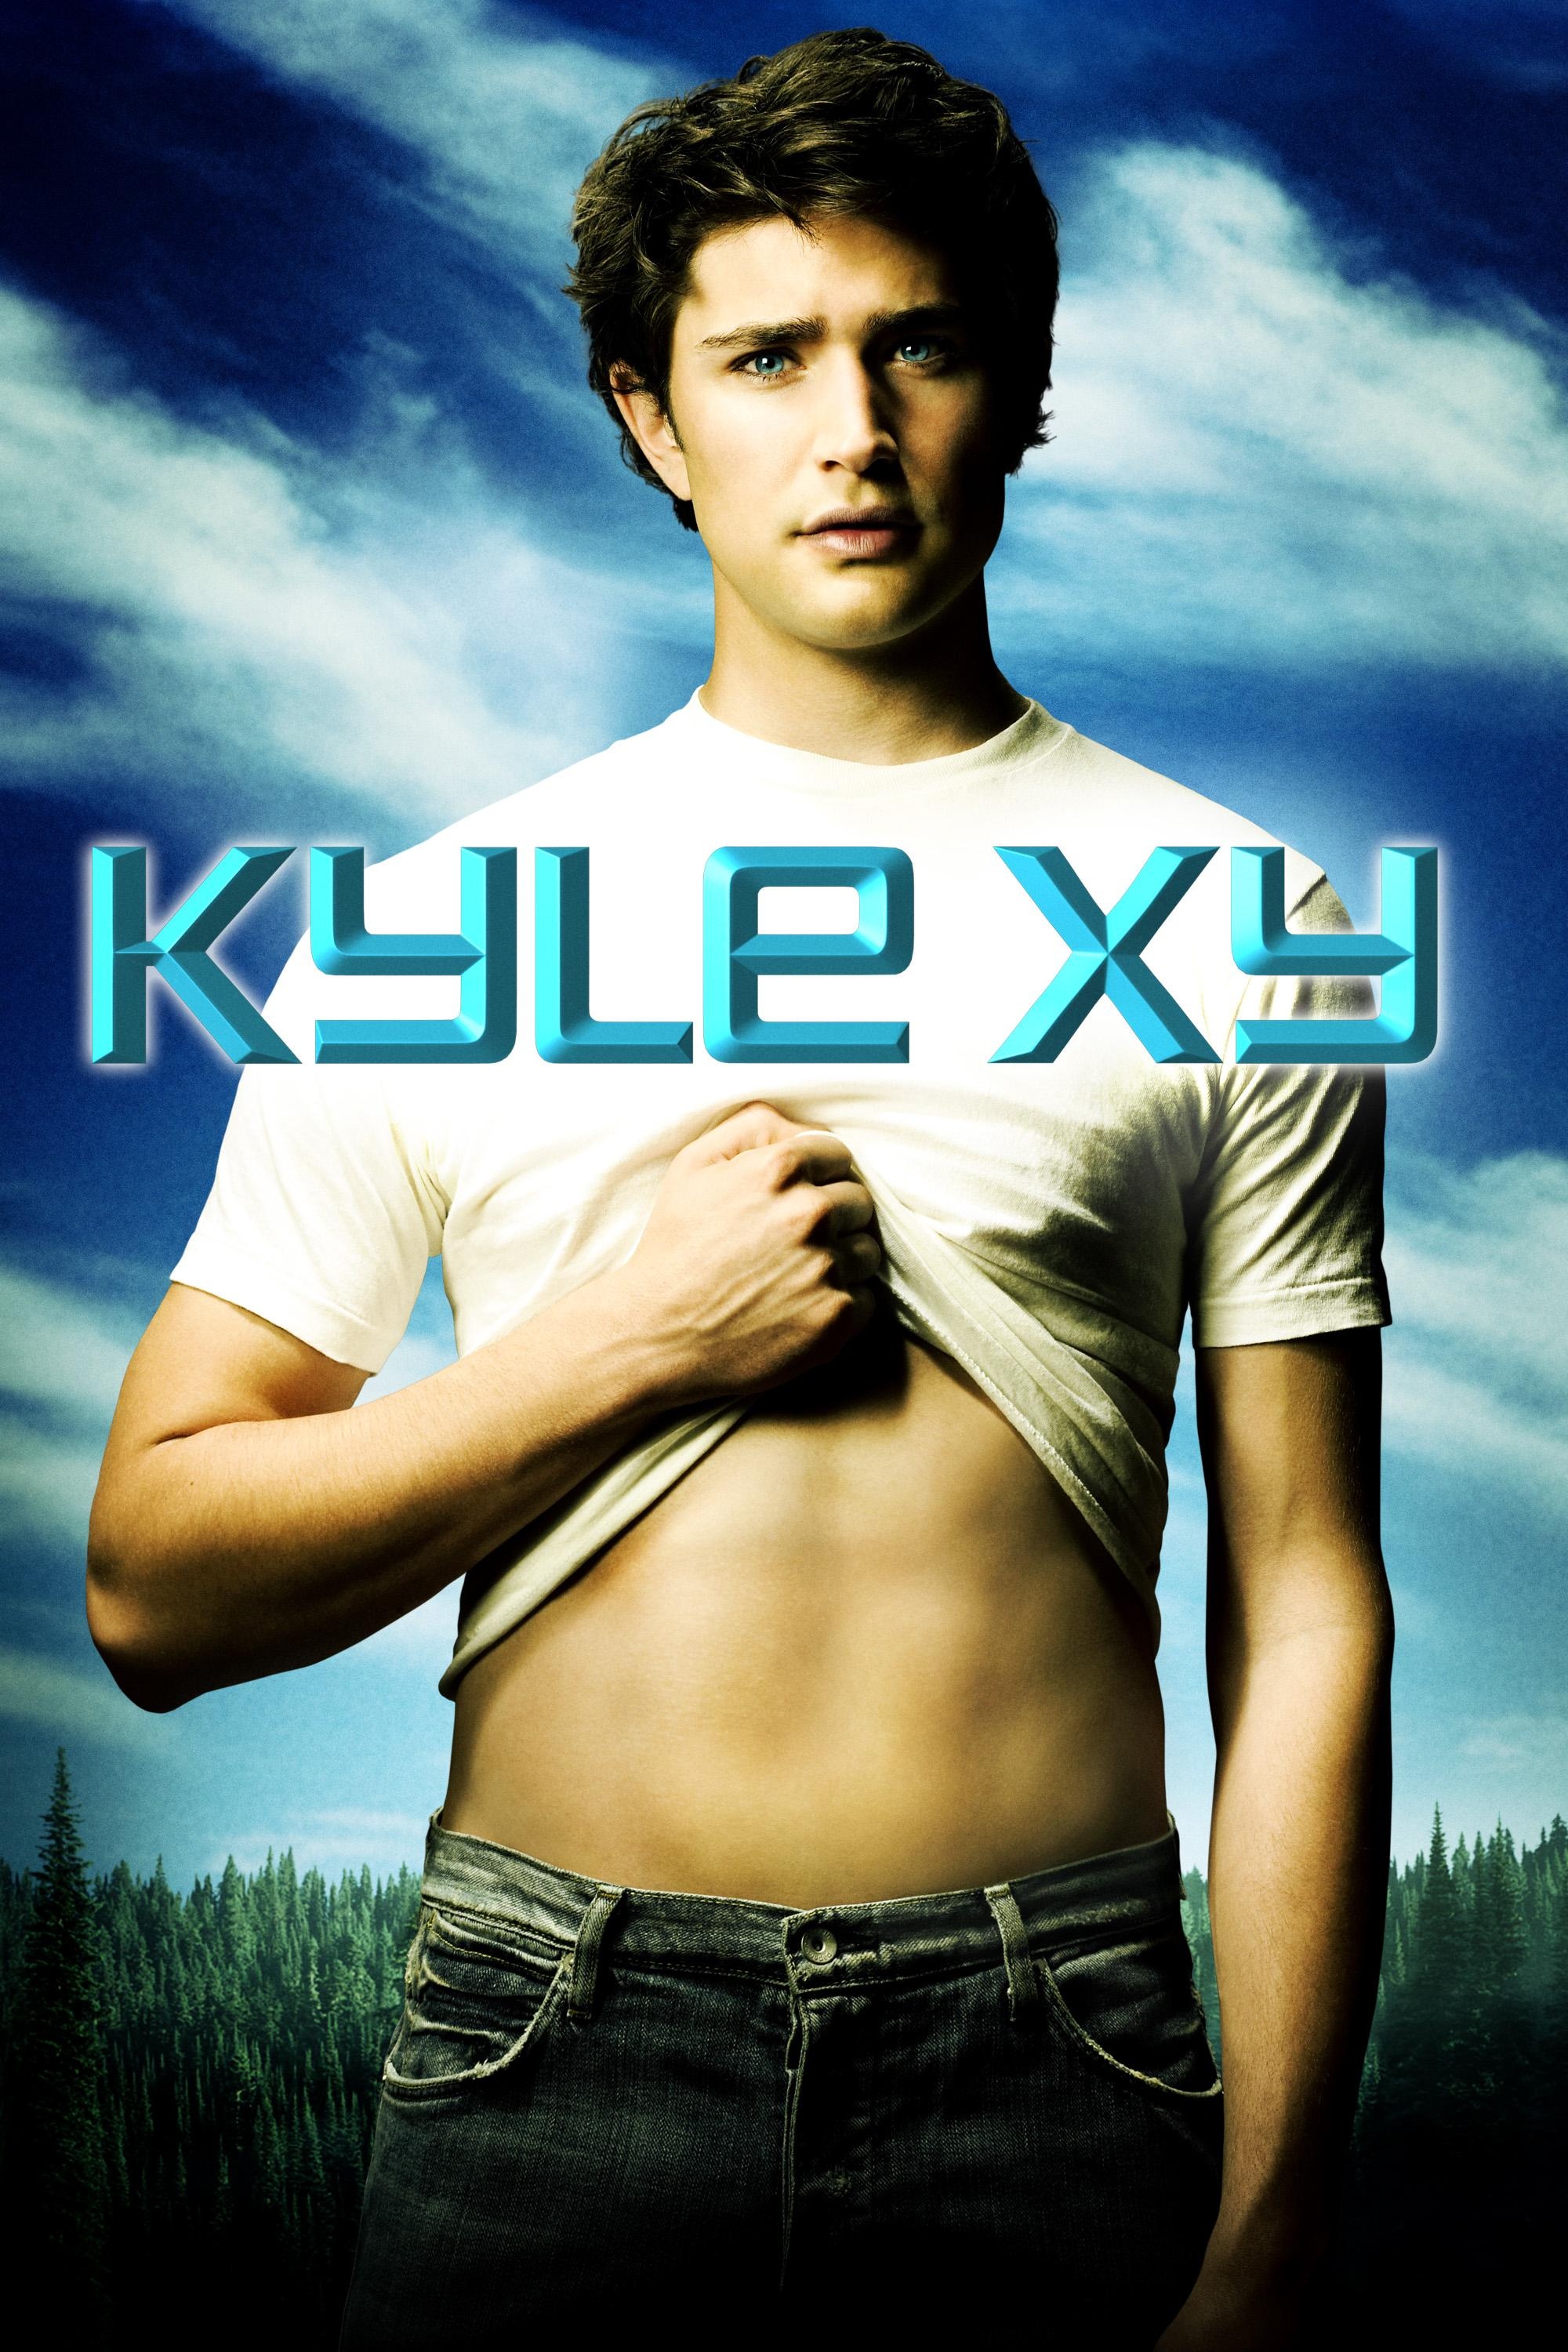 Kyle XY (TV Series): An American teen drama science fiction television series produced by ABC Family. 2000x3000 HD Wallpaper.